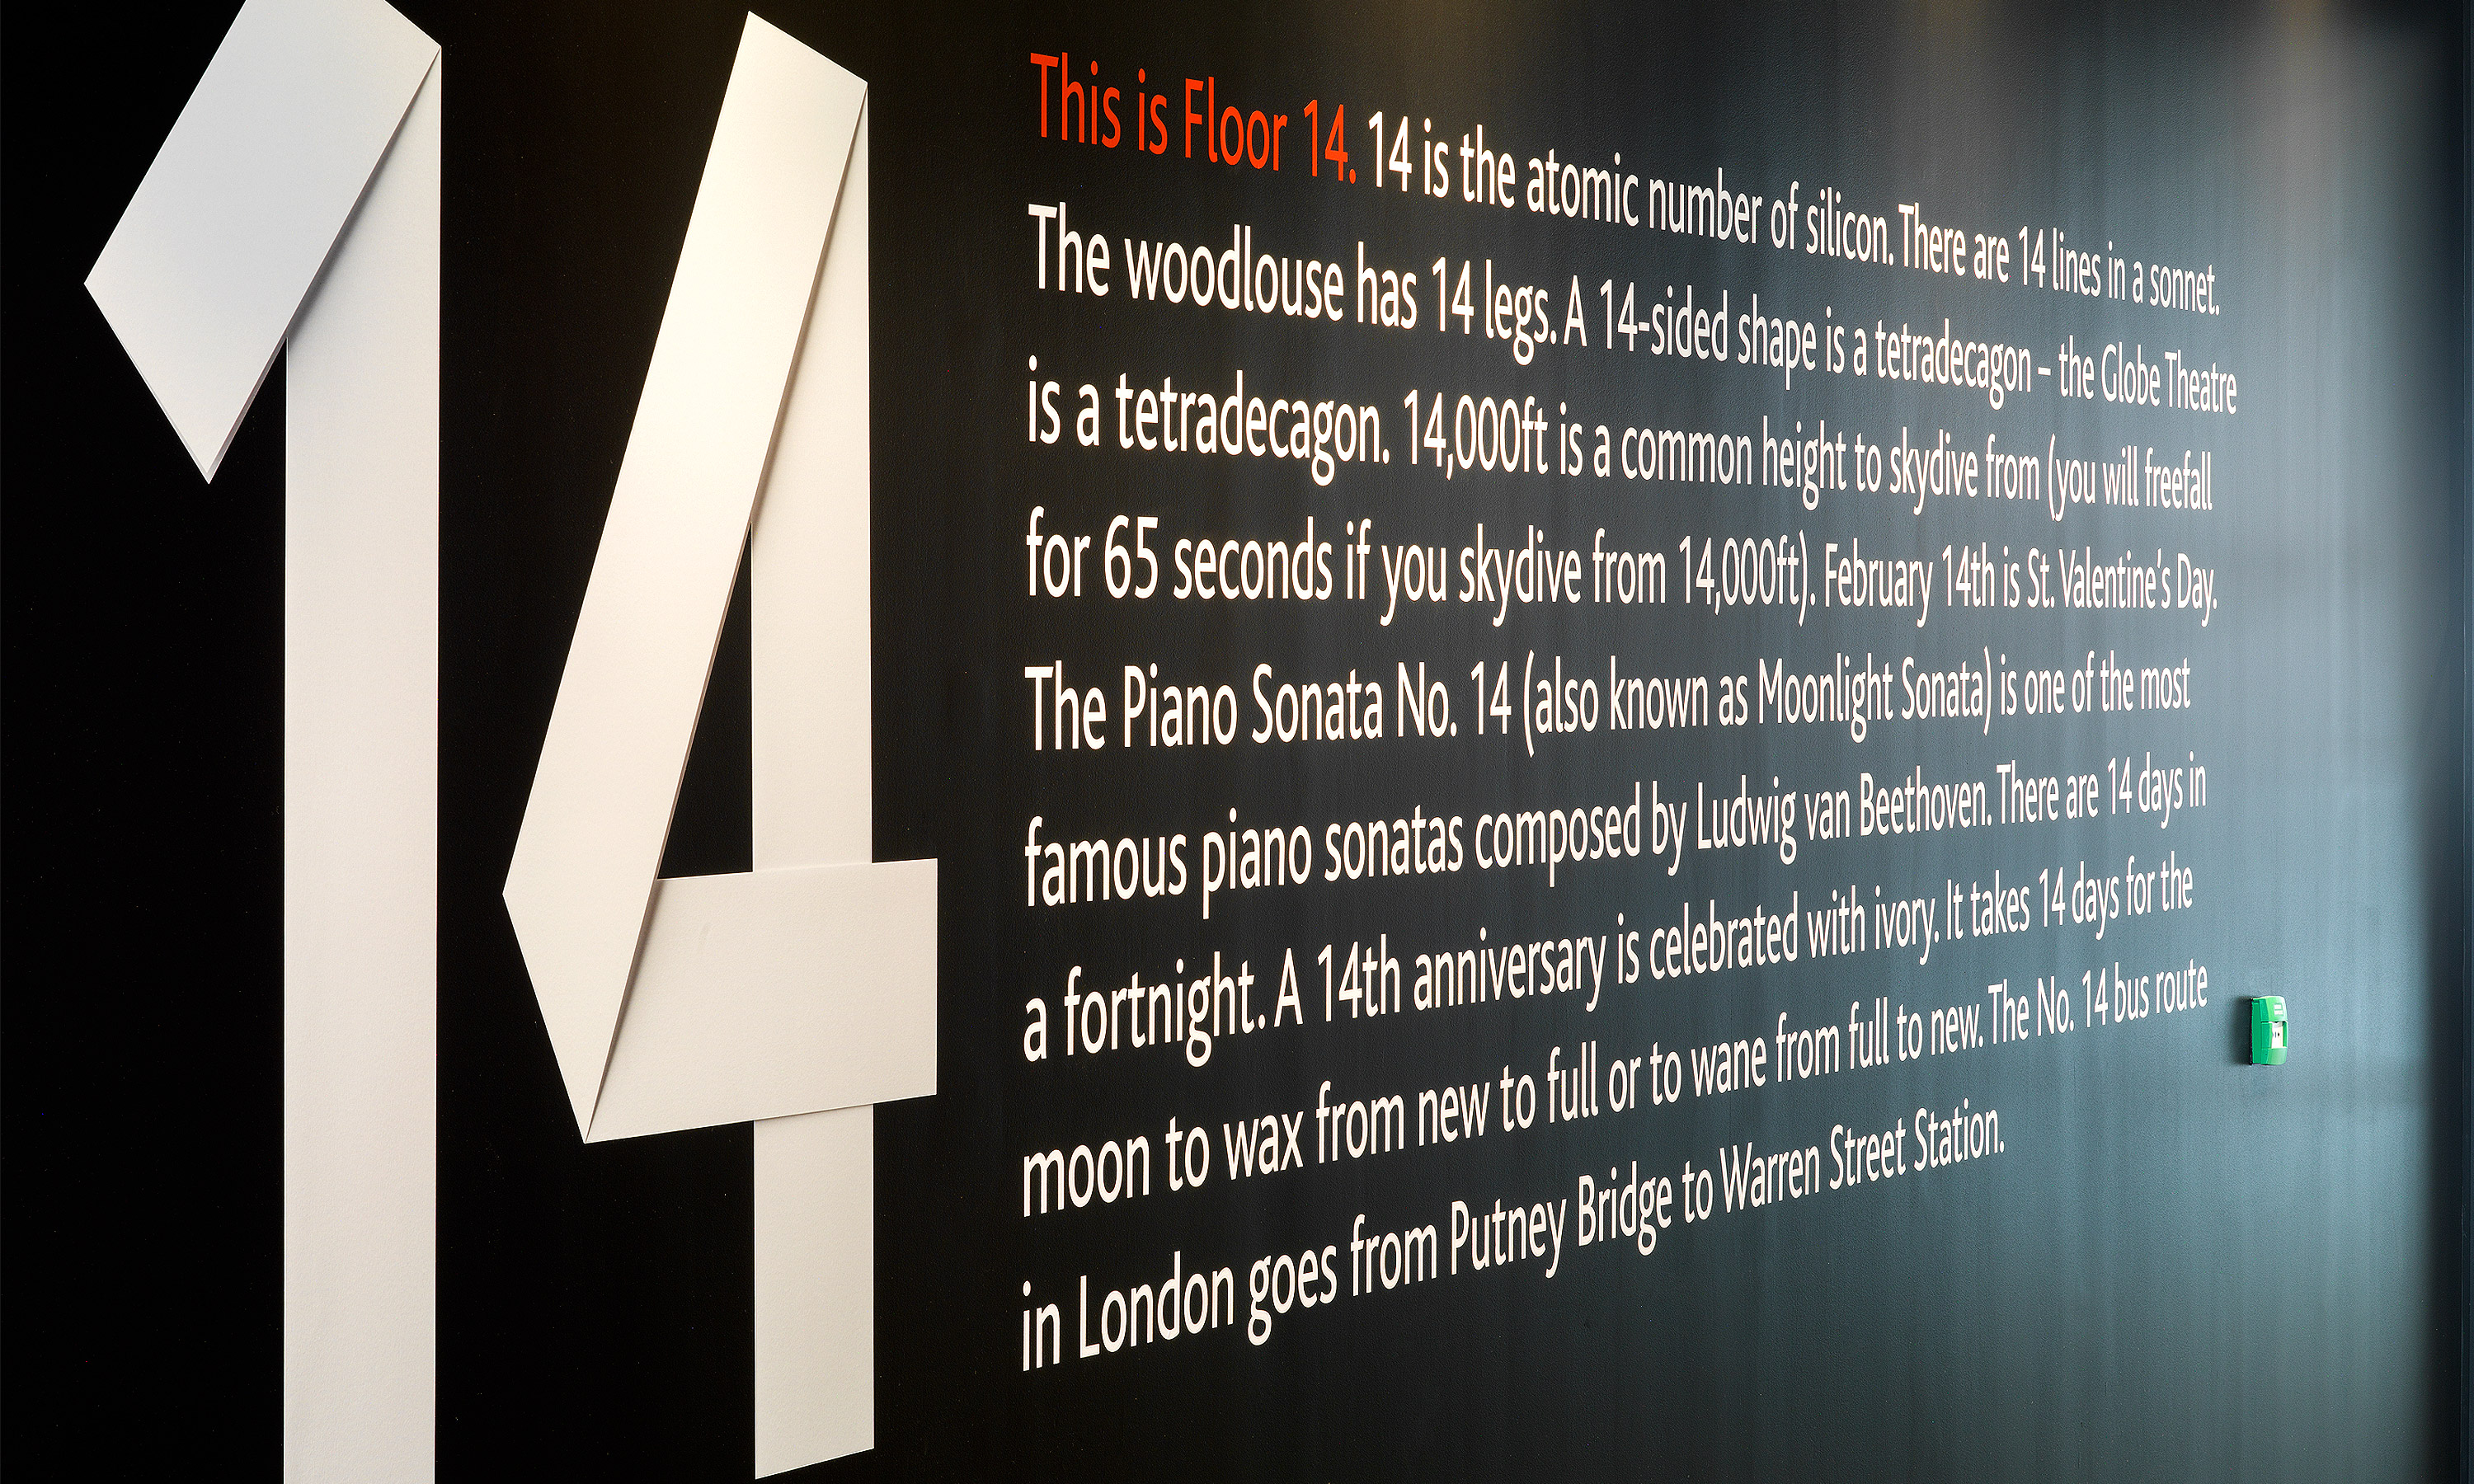 Branding by Neon - Nabarro Law Firm - Law sector branding - 125 London Wall Lift Lobby Floor 14 lift graphics designed by Dana Robertson